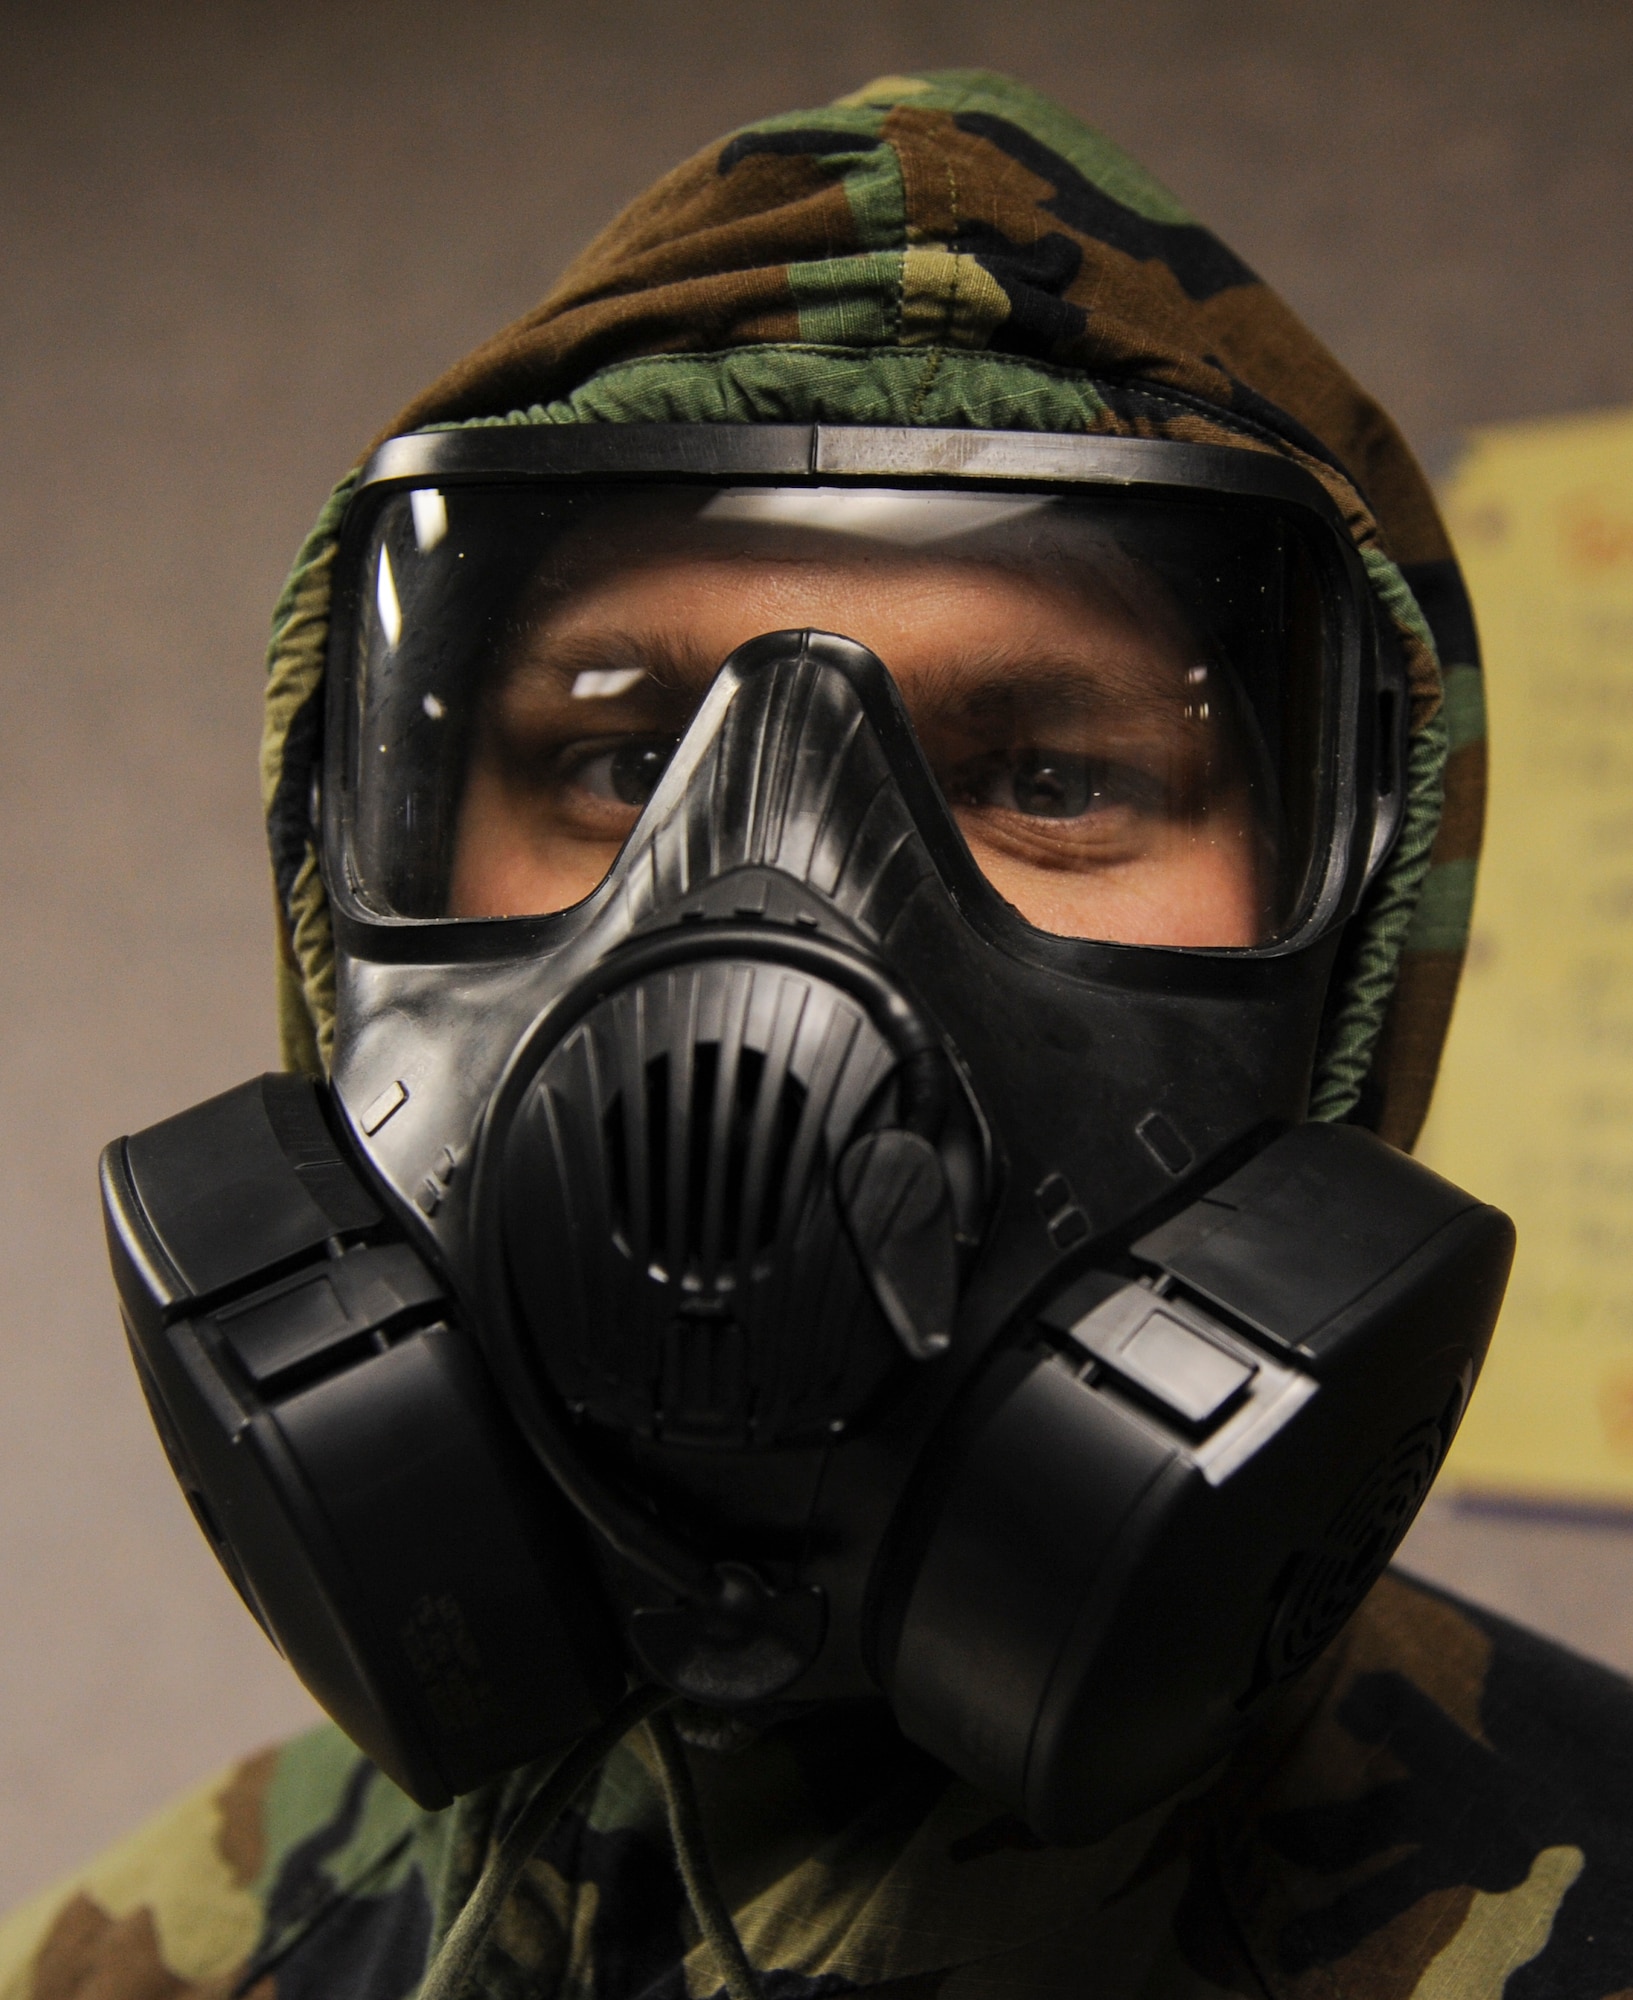 Staff Sgt. Paul Jones, a 19th Security Forces Squadron flight chief, tries on the M50 gas mask Feb. 12, 2014, at Little Rock Air Force Base, Ark. Airmen must be comfortable with mission oriented protective posture gear before a deployment. (U.S. Air Force photo by Airman 1st Class Harry Brexel)